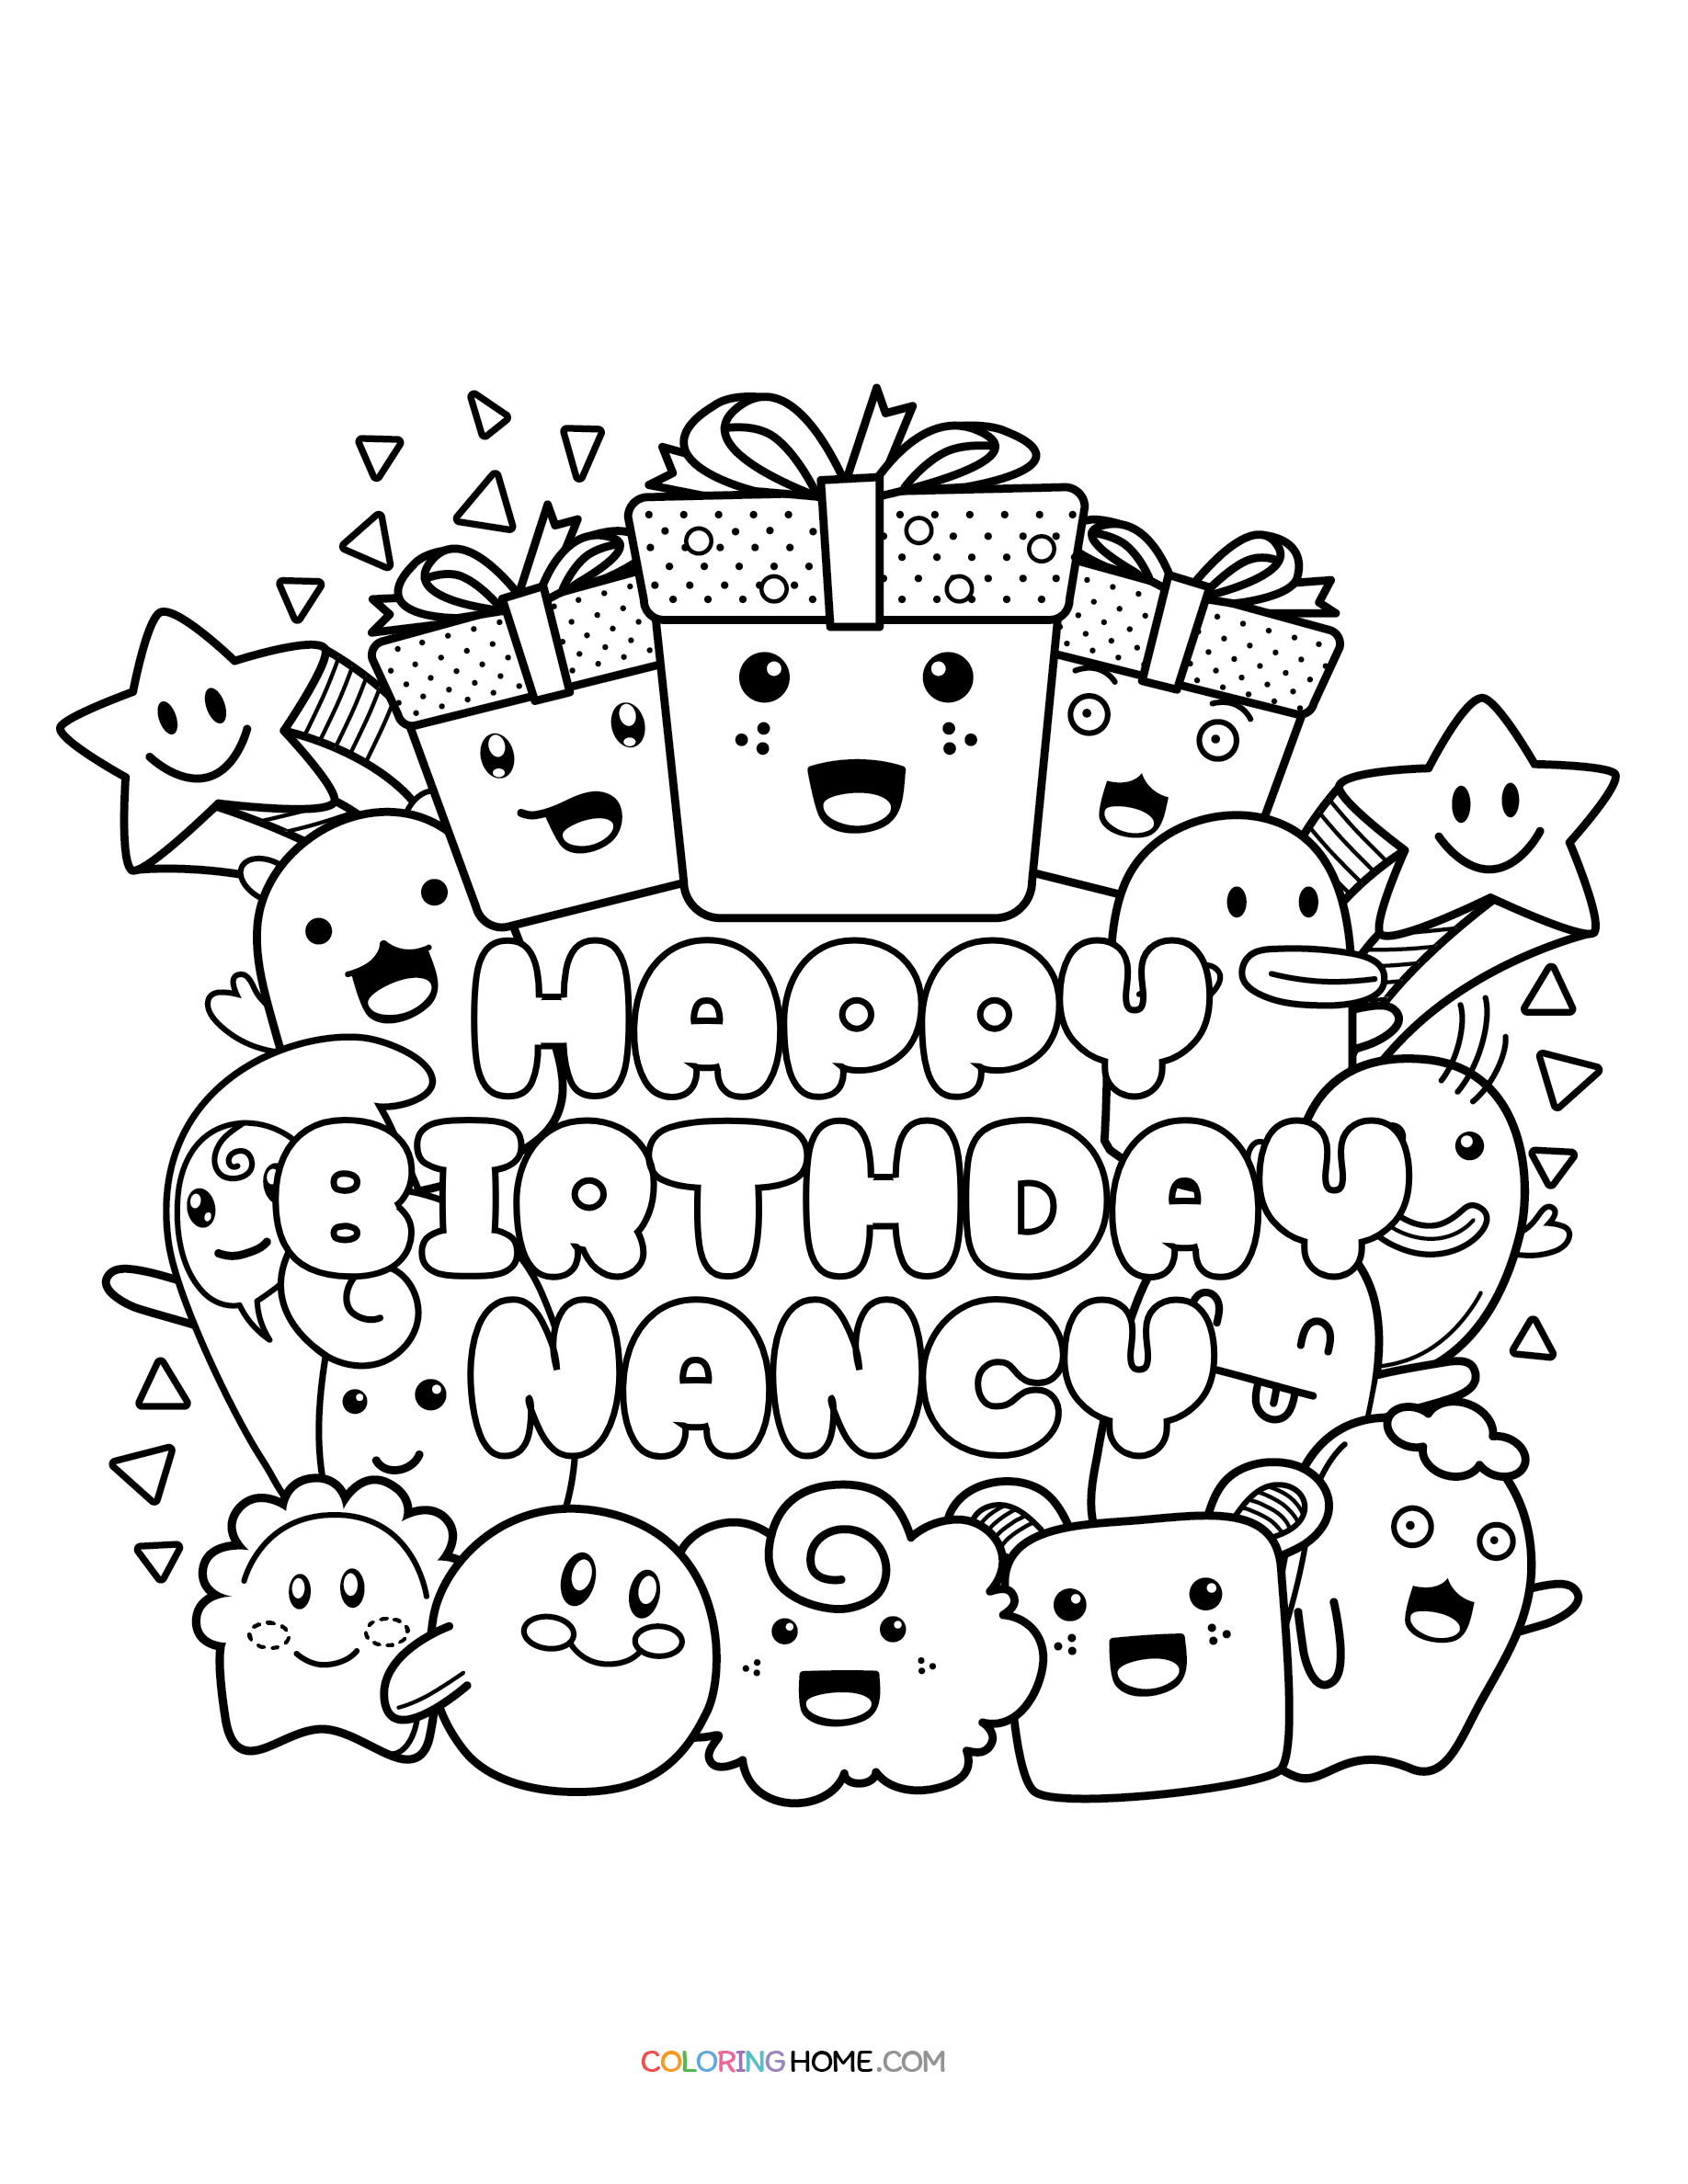 Happy Birthday Nancy coloring page